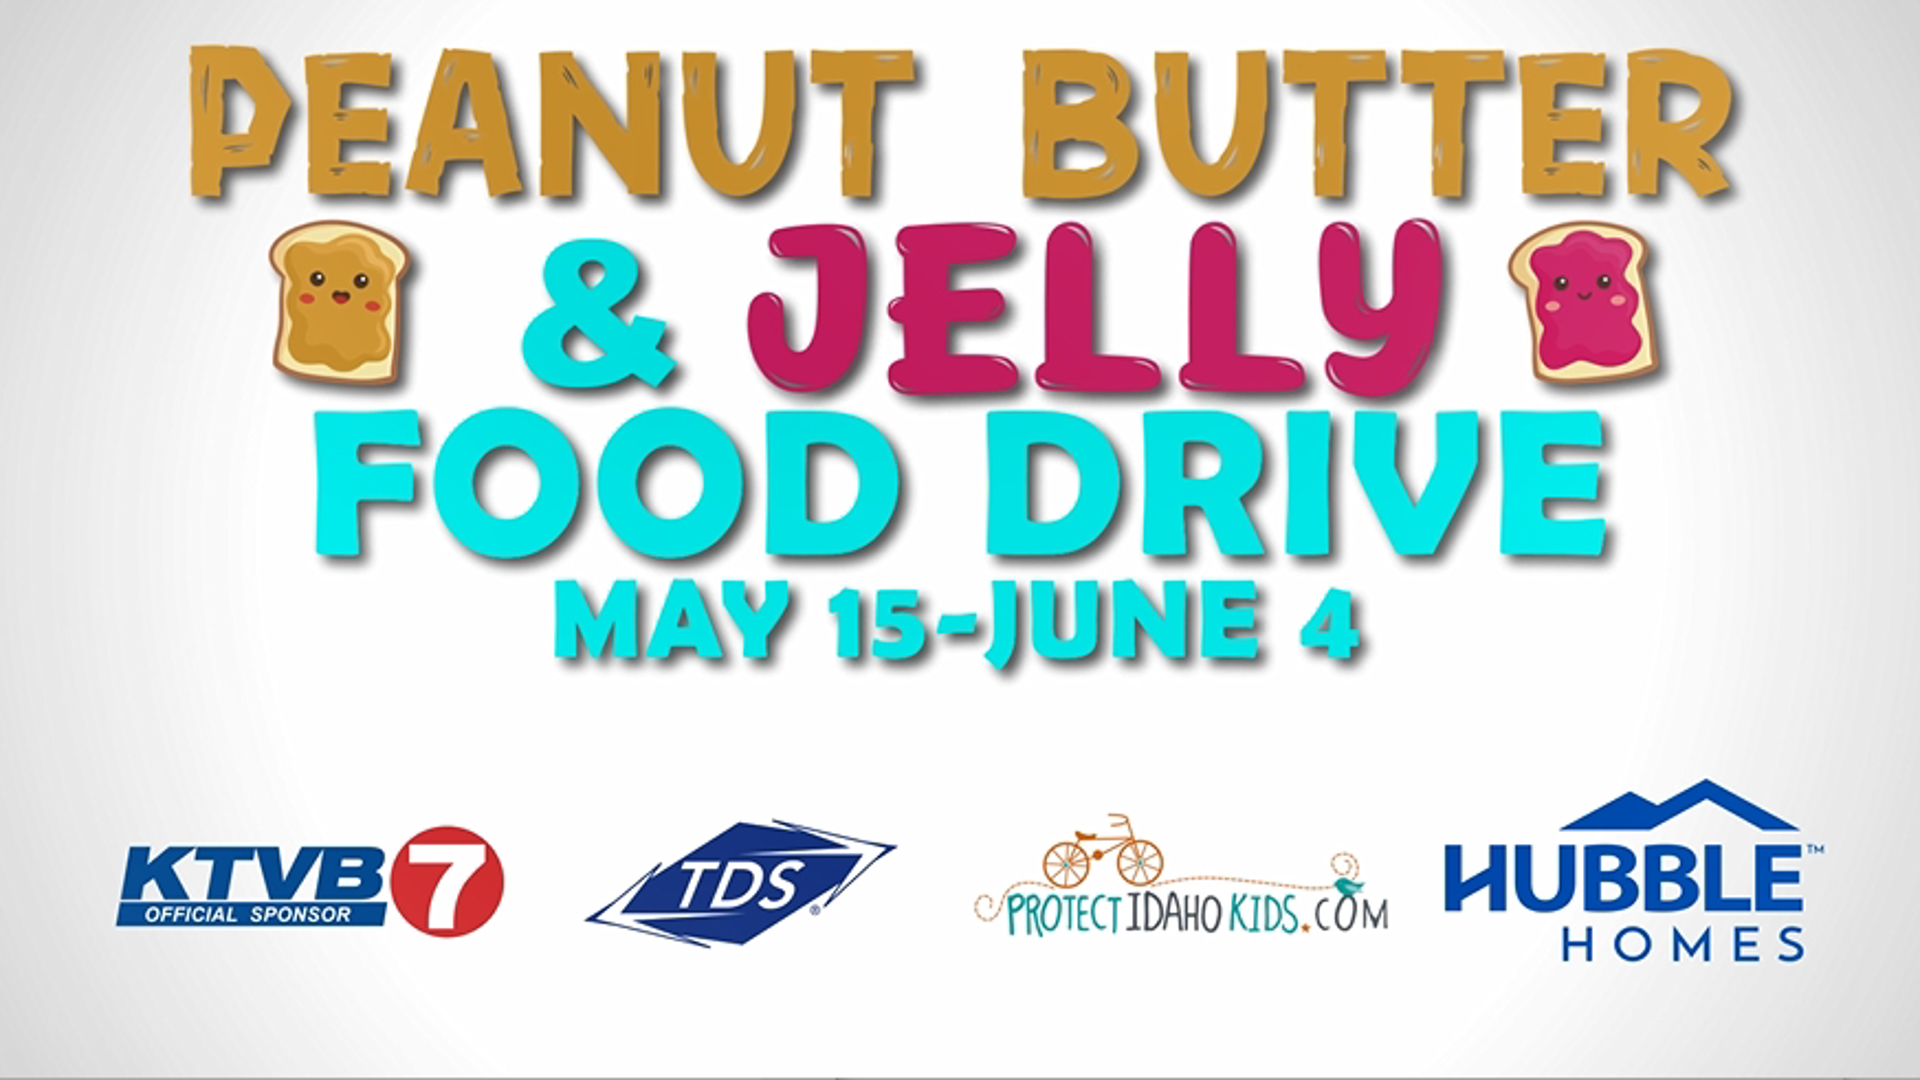 Sponsored by Hubble Homes. Donate money or drop off food supplies for the PB&J Food Drive by June 4th, visit protectidahokids.org for more information!